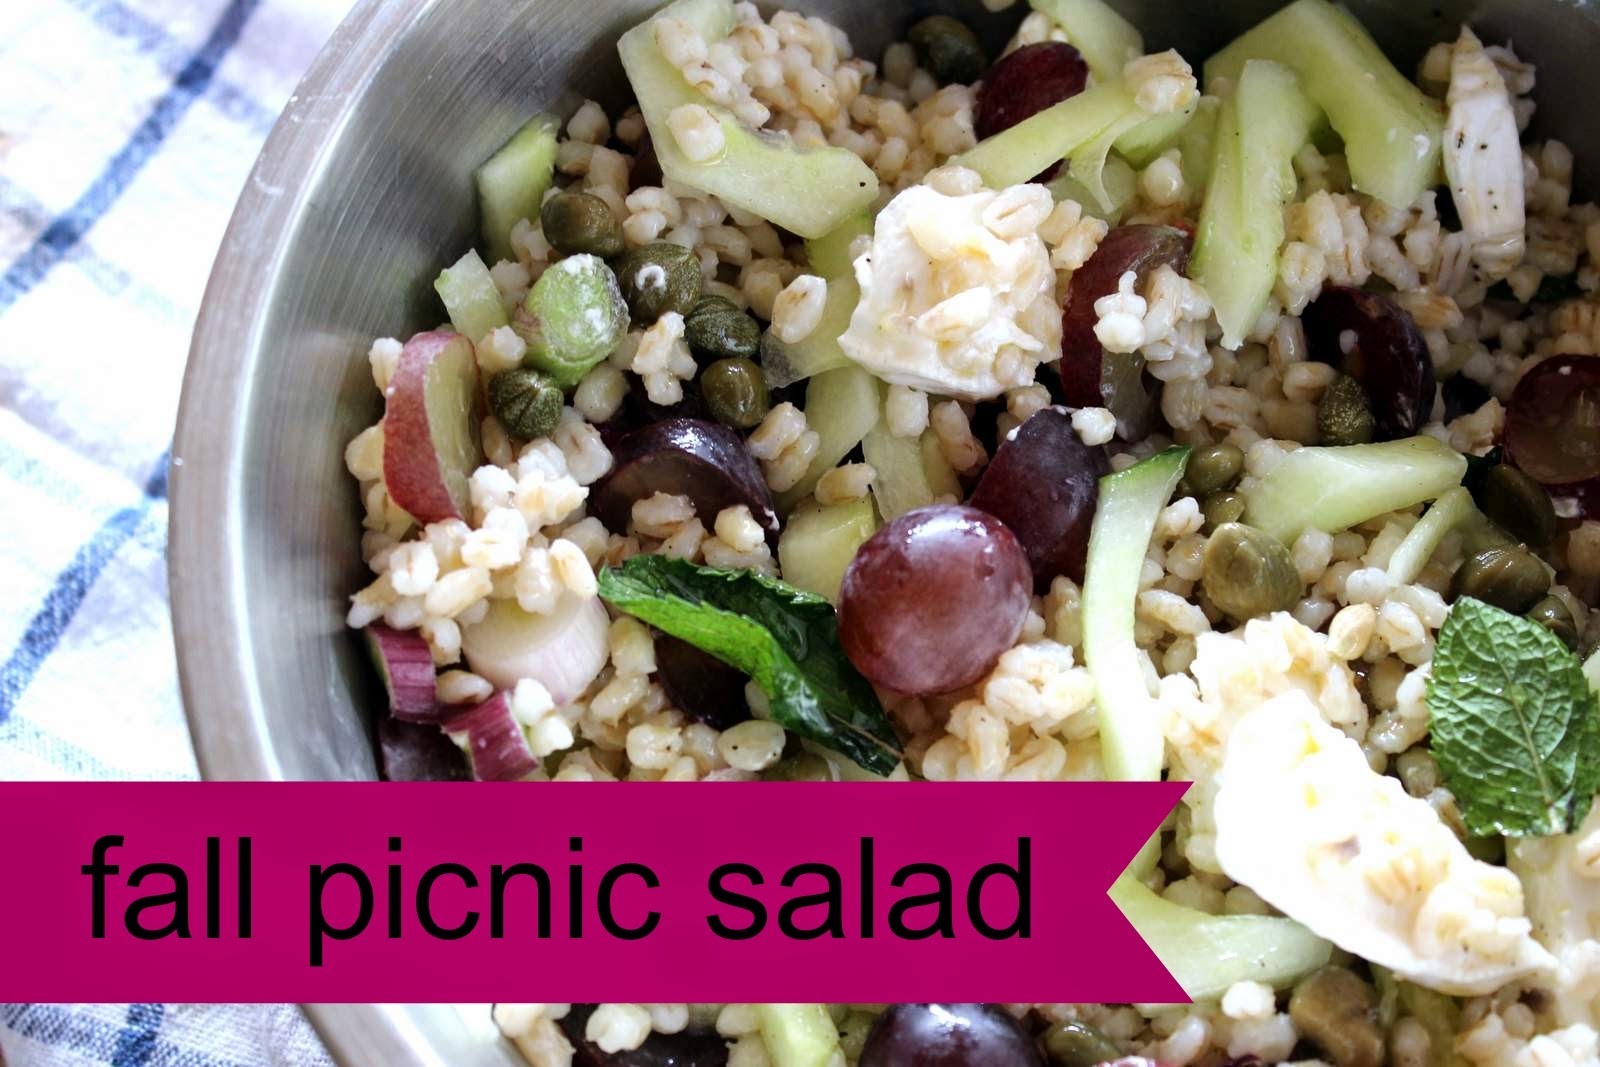 Picnic salad with grapes, farro and goat cheese